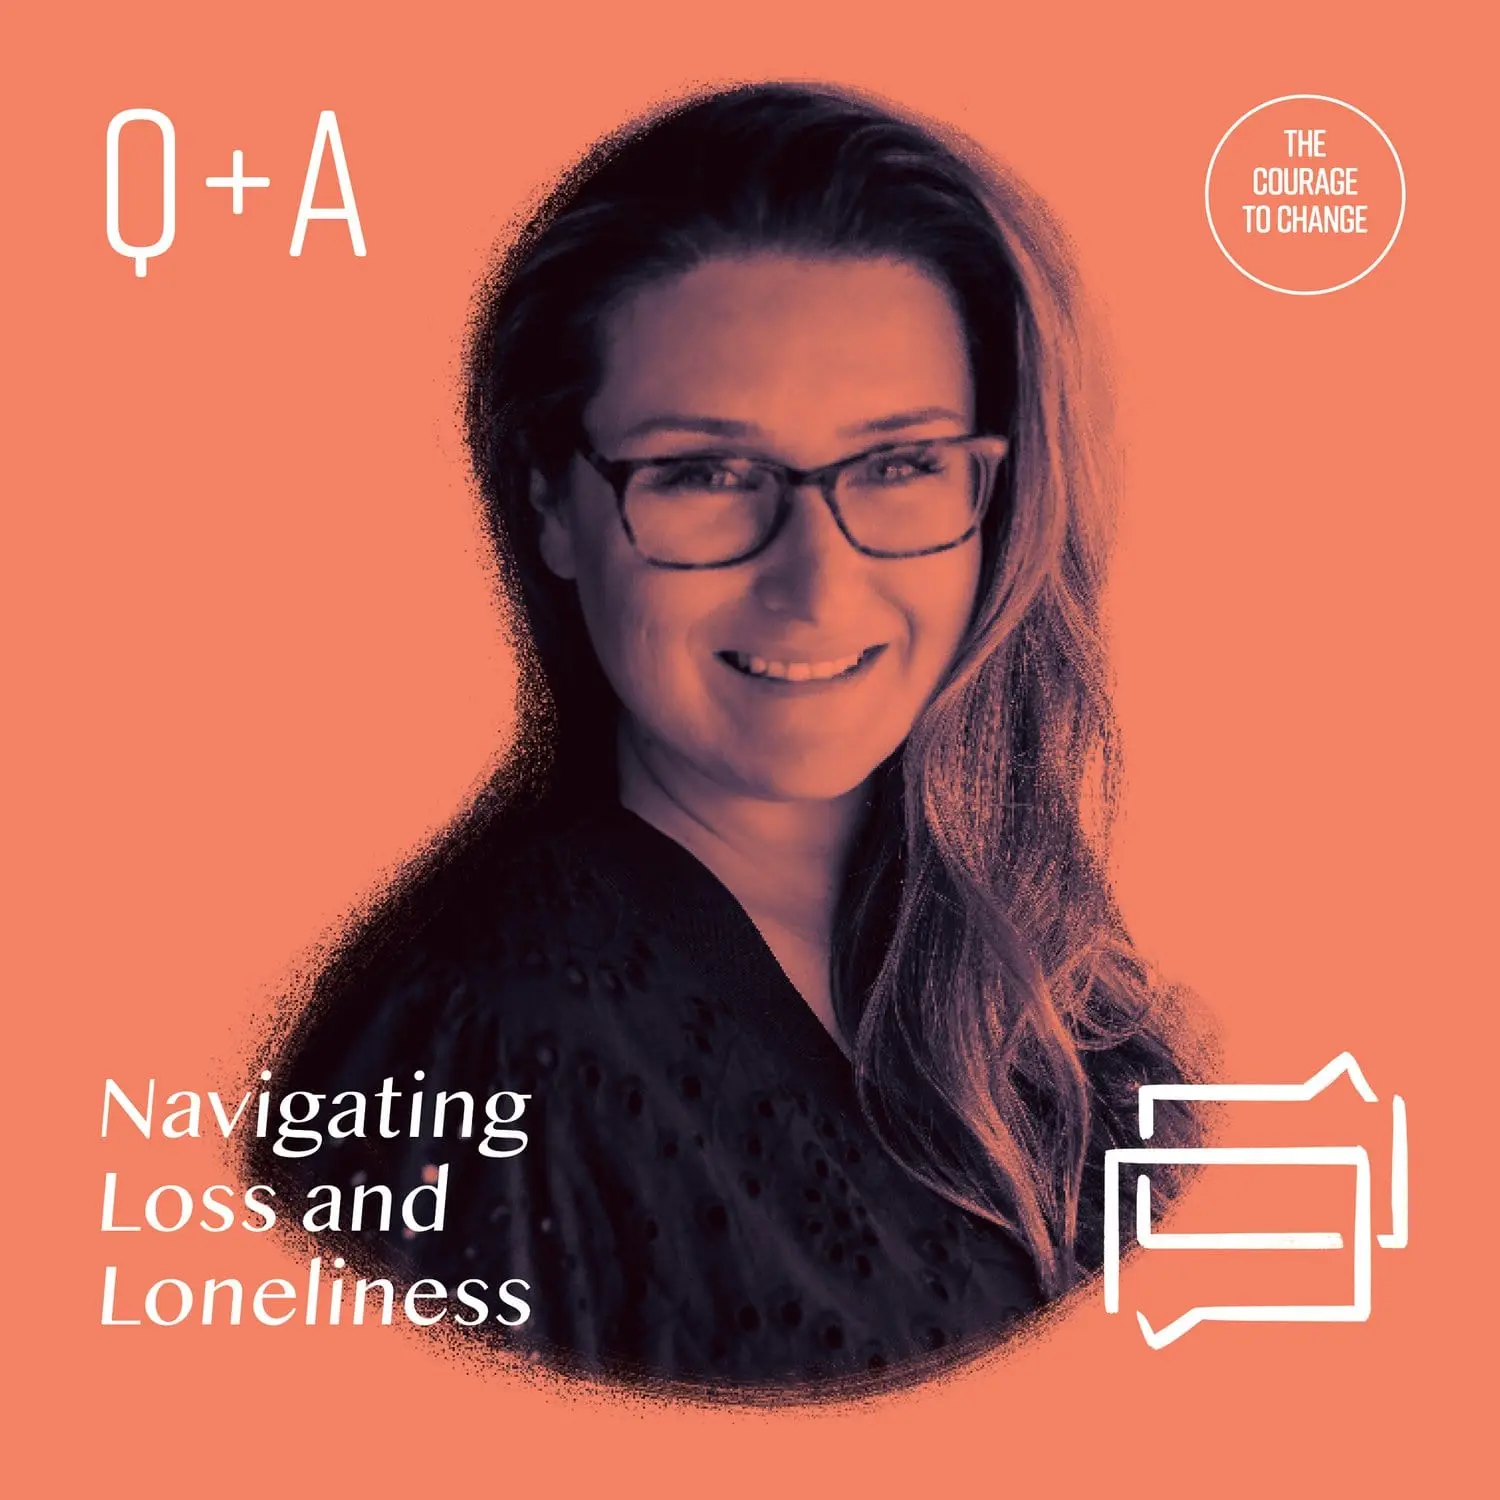 Q+A Navigating Loss And Loneliness